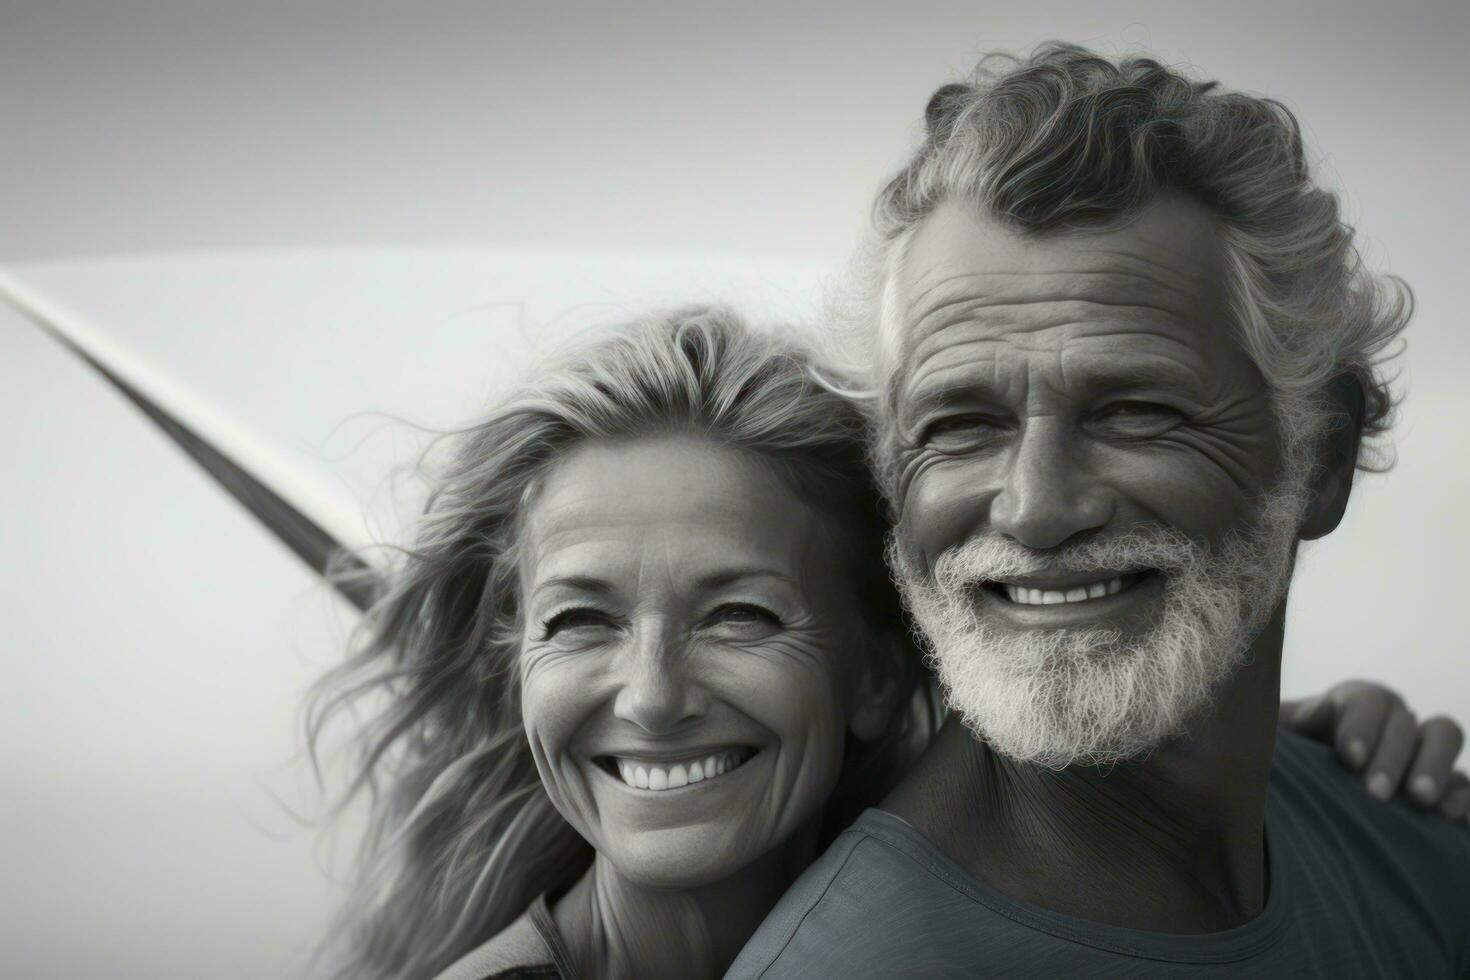 an elderly couple standing together holding a surfboard photo